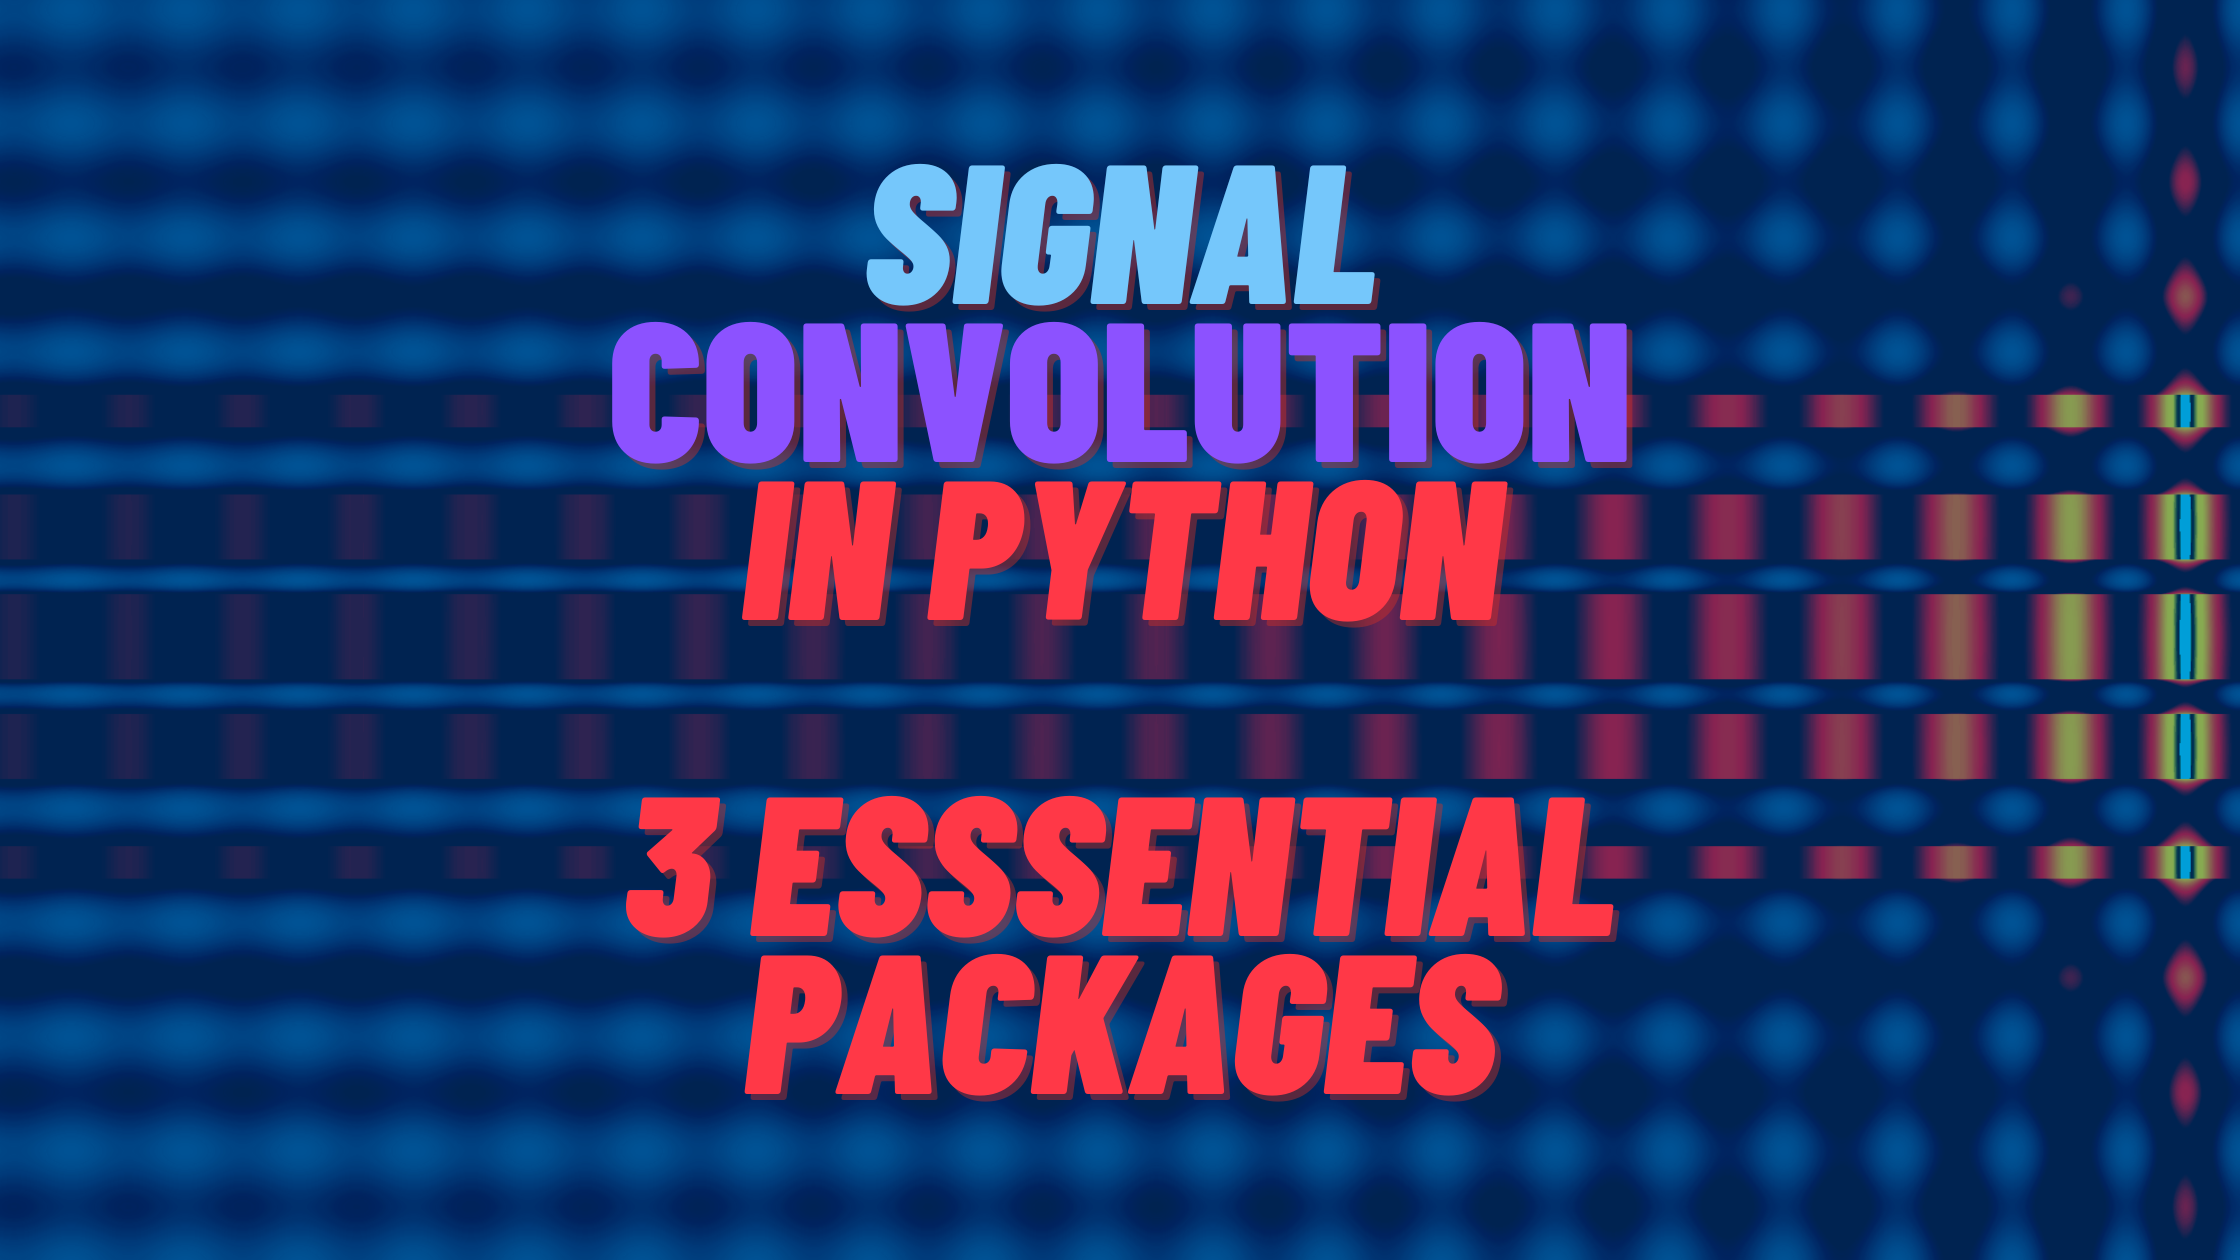 4 Ways to Calculate Convolution in Python